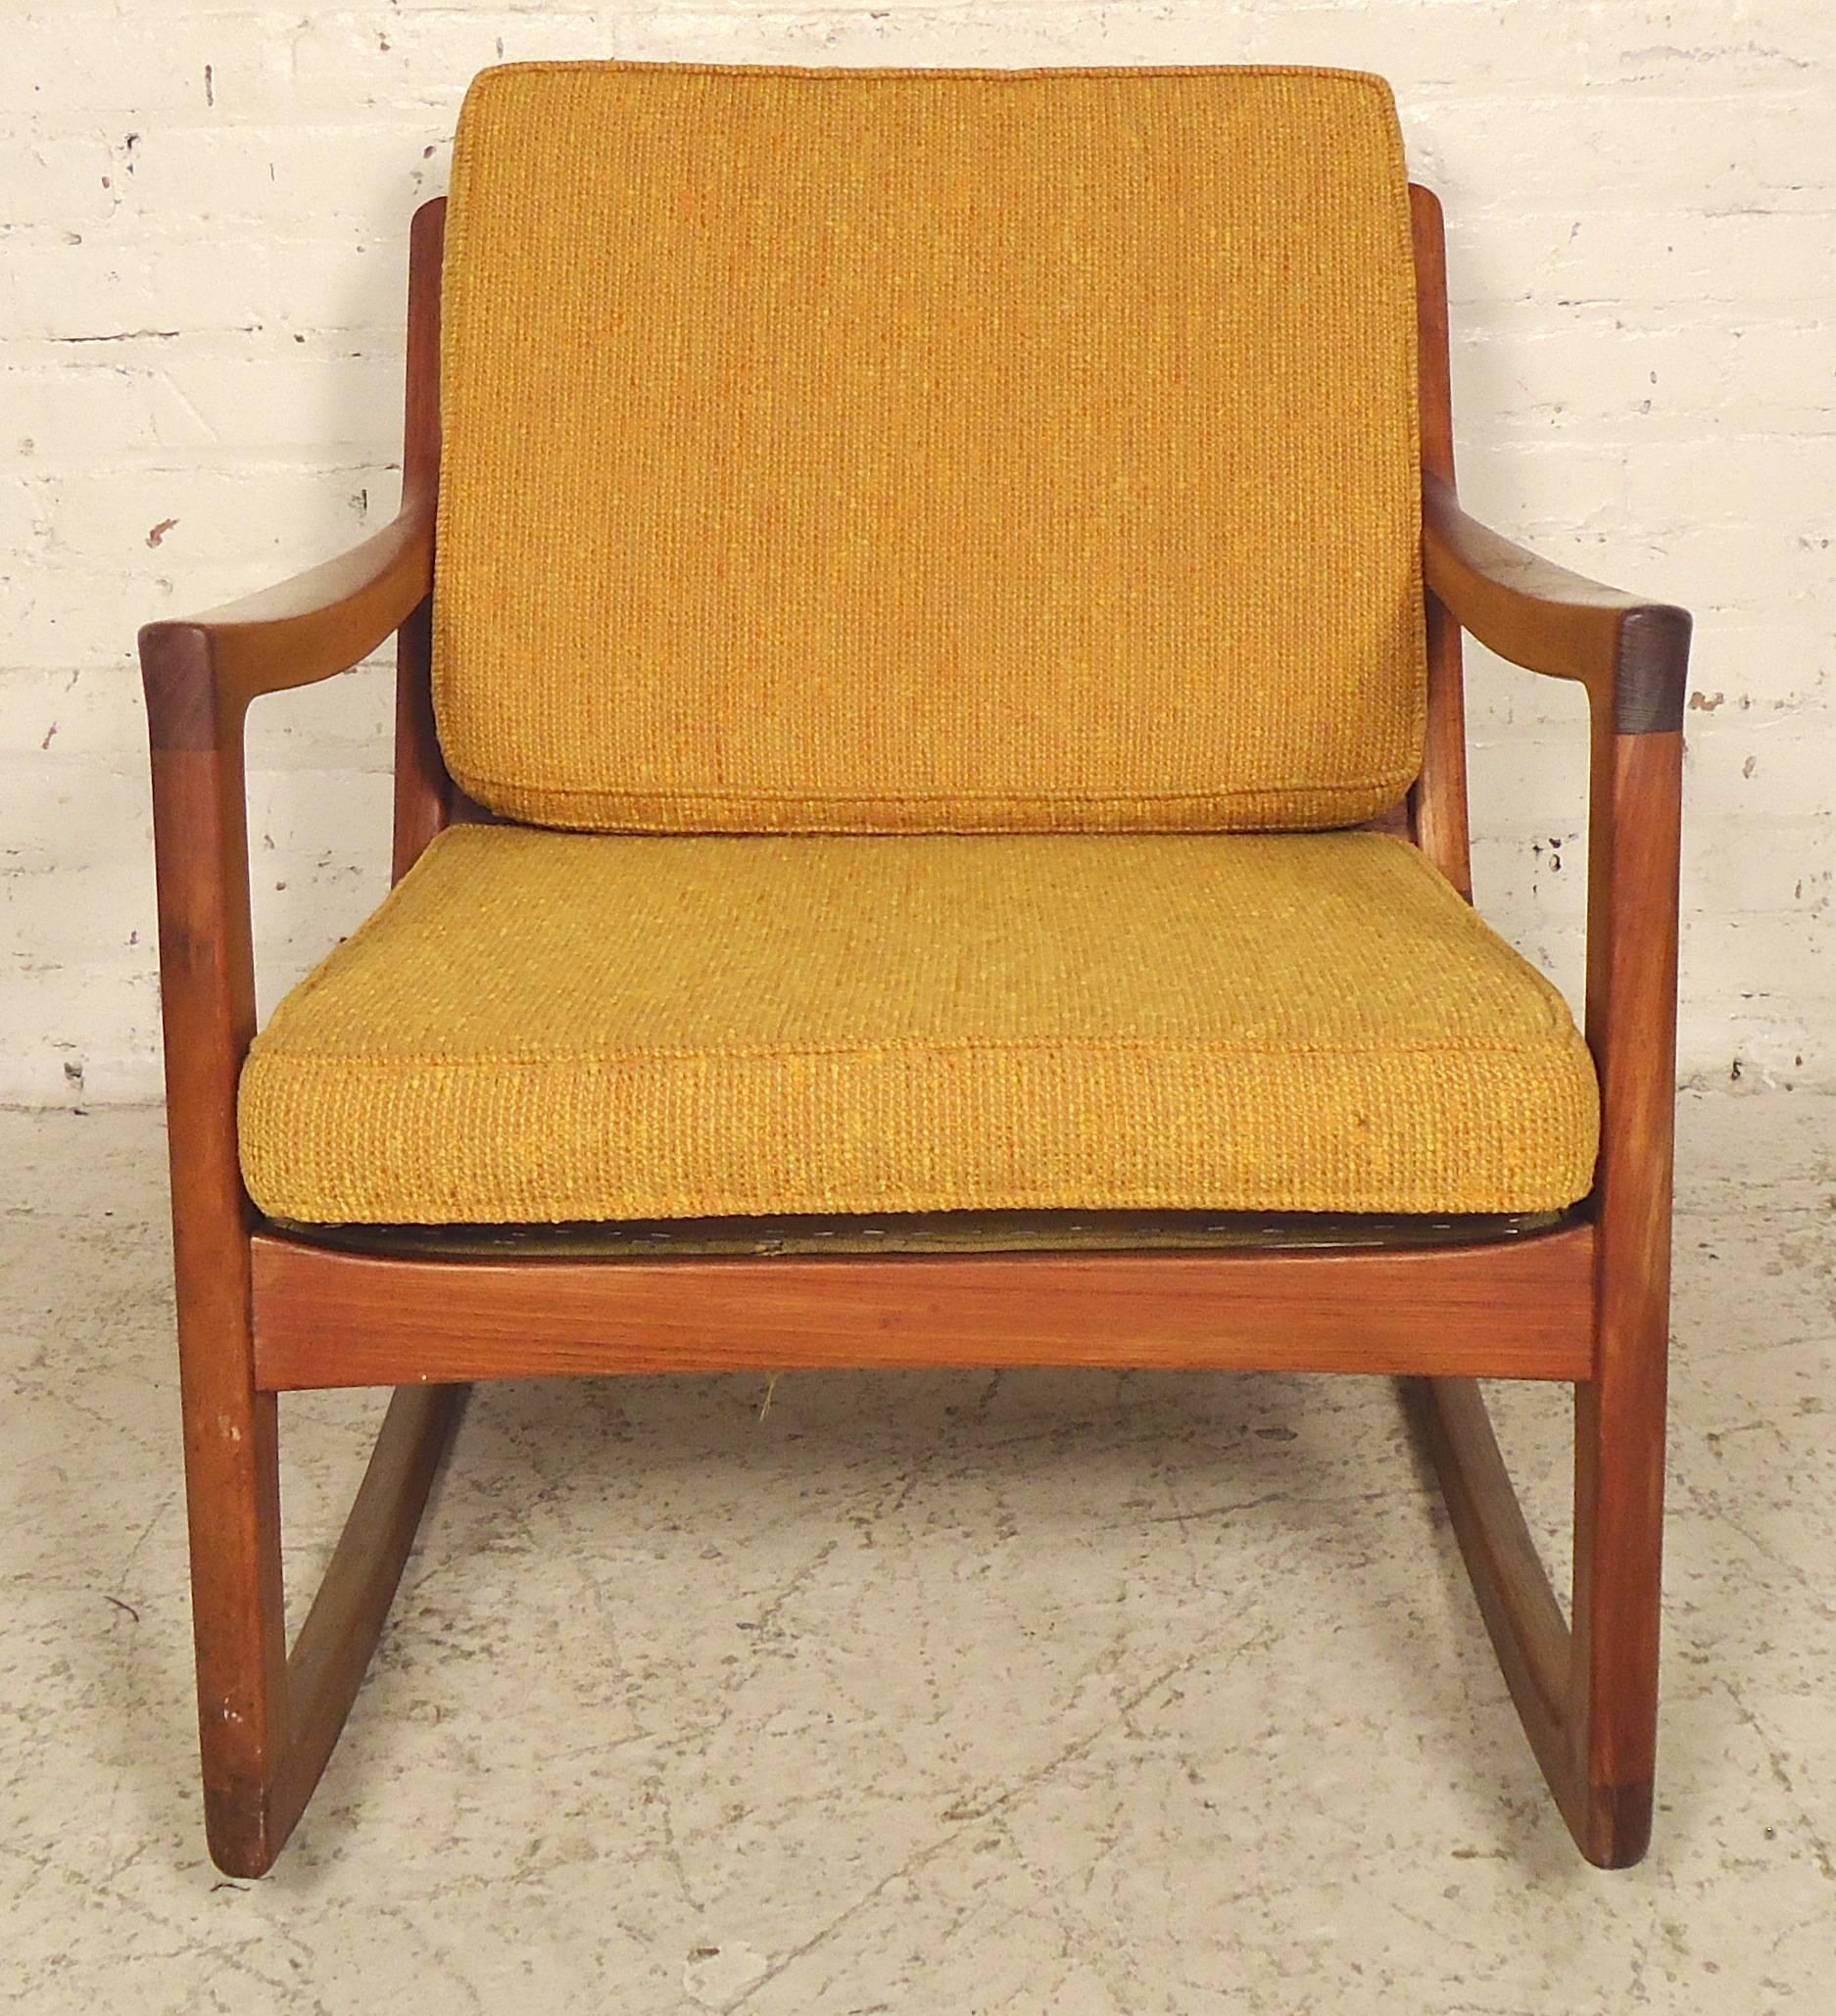 Attractive vintage rocker by Ole Wanscher for Cado, made from sculpted teak with two cushions. Warm grained teak frame with graceful style and superior craftsmanship.

(Please confirm item location - NY or NJ - with dealer).
 